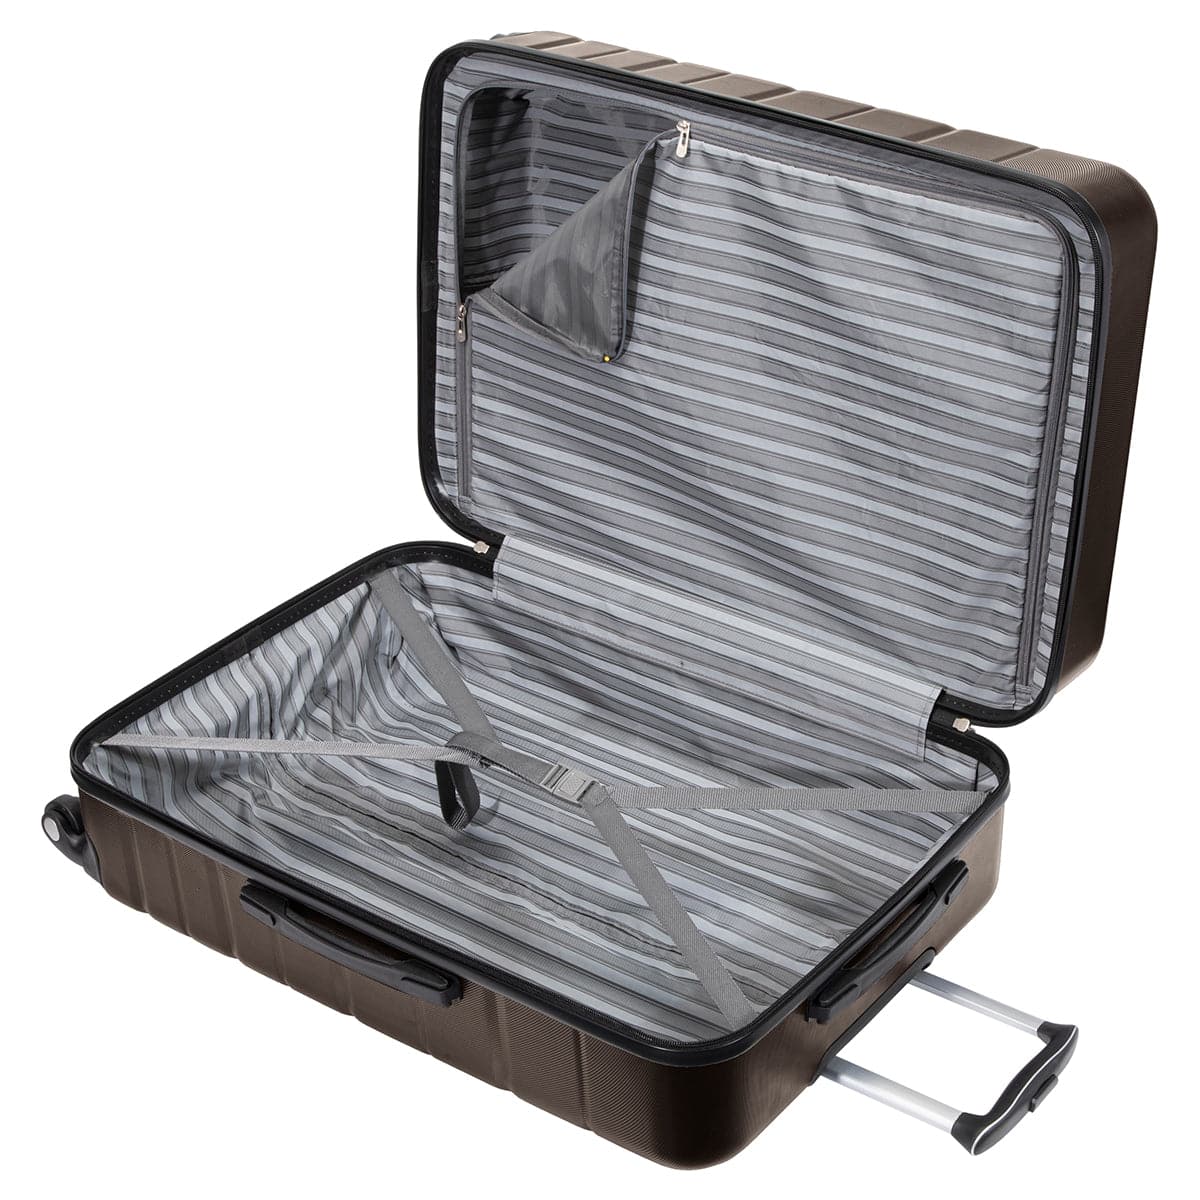 Skyway EPIC 2.0 Hardside Large Check-In Luggage